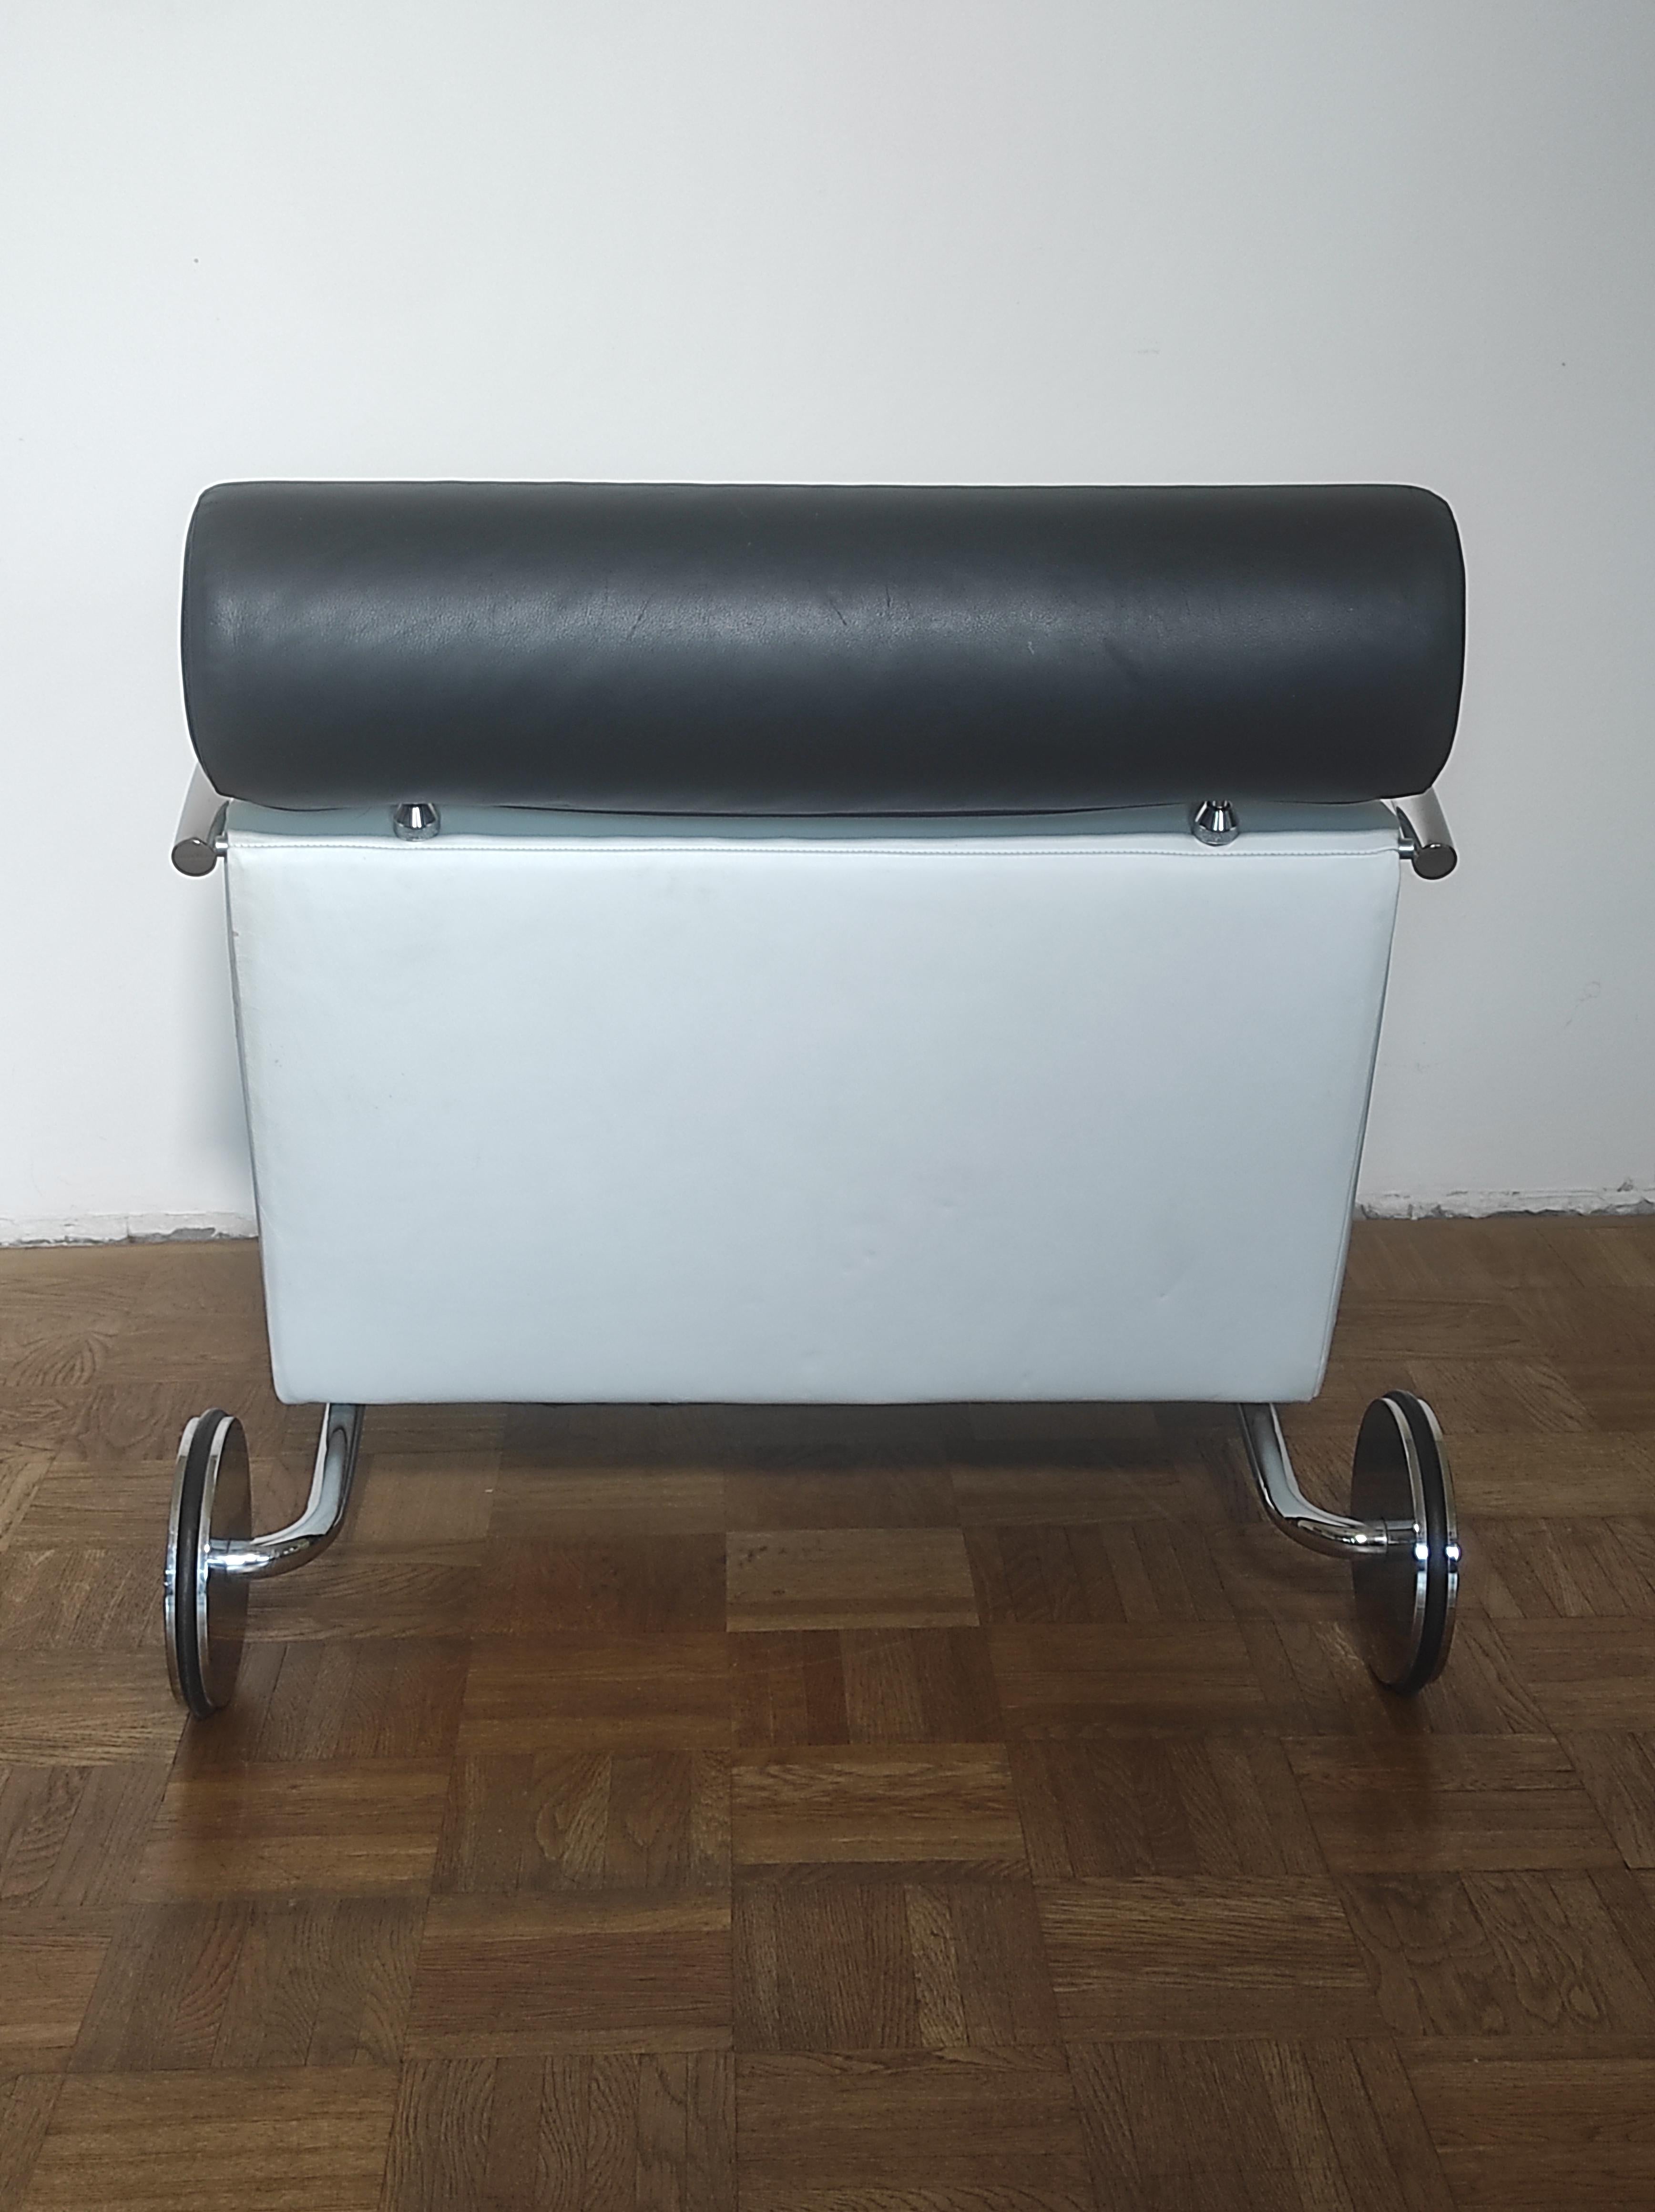 Zyklus Longue Chair By Peter Maly for COR 1980s In Good Condition For Sale In Čelinac, BA